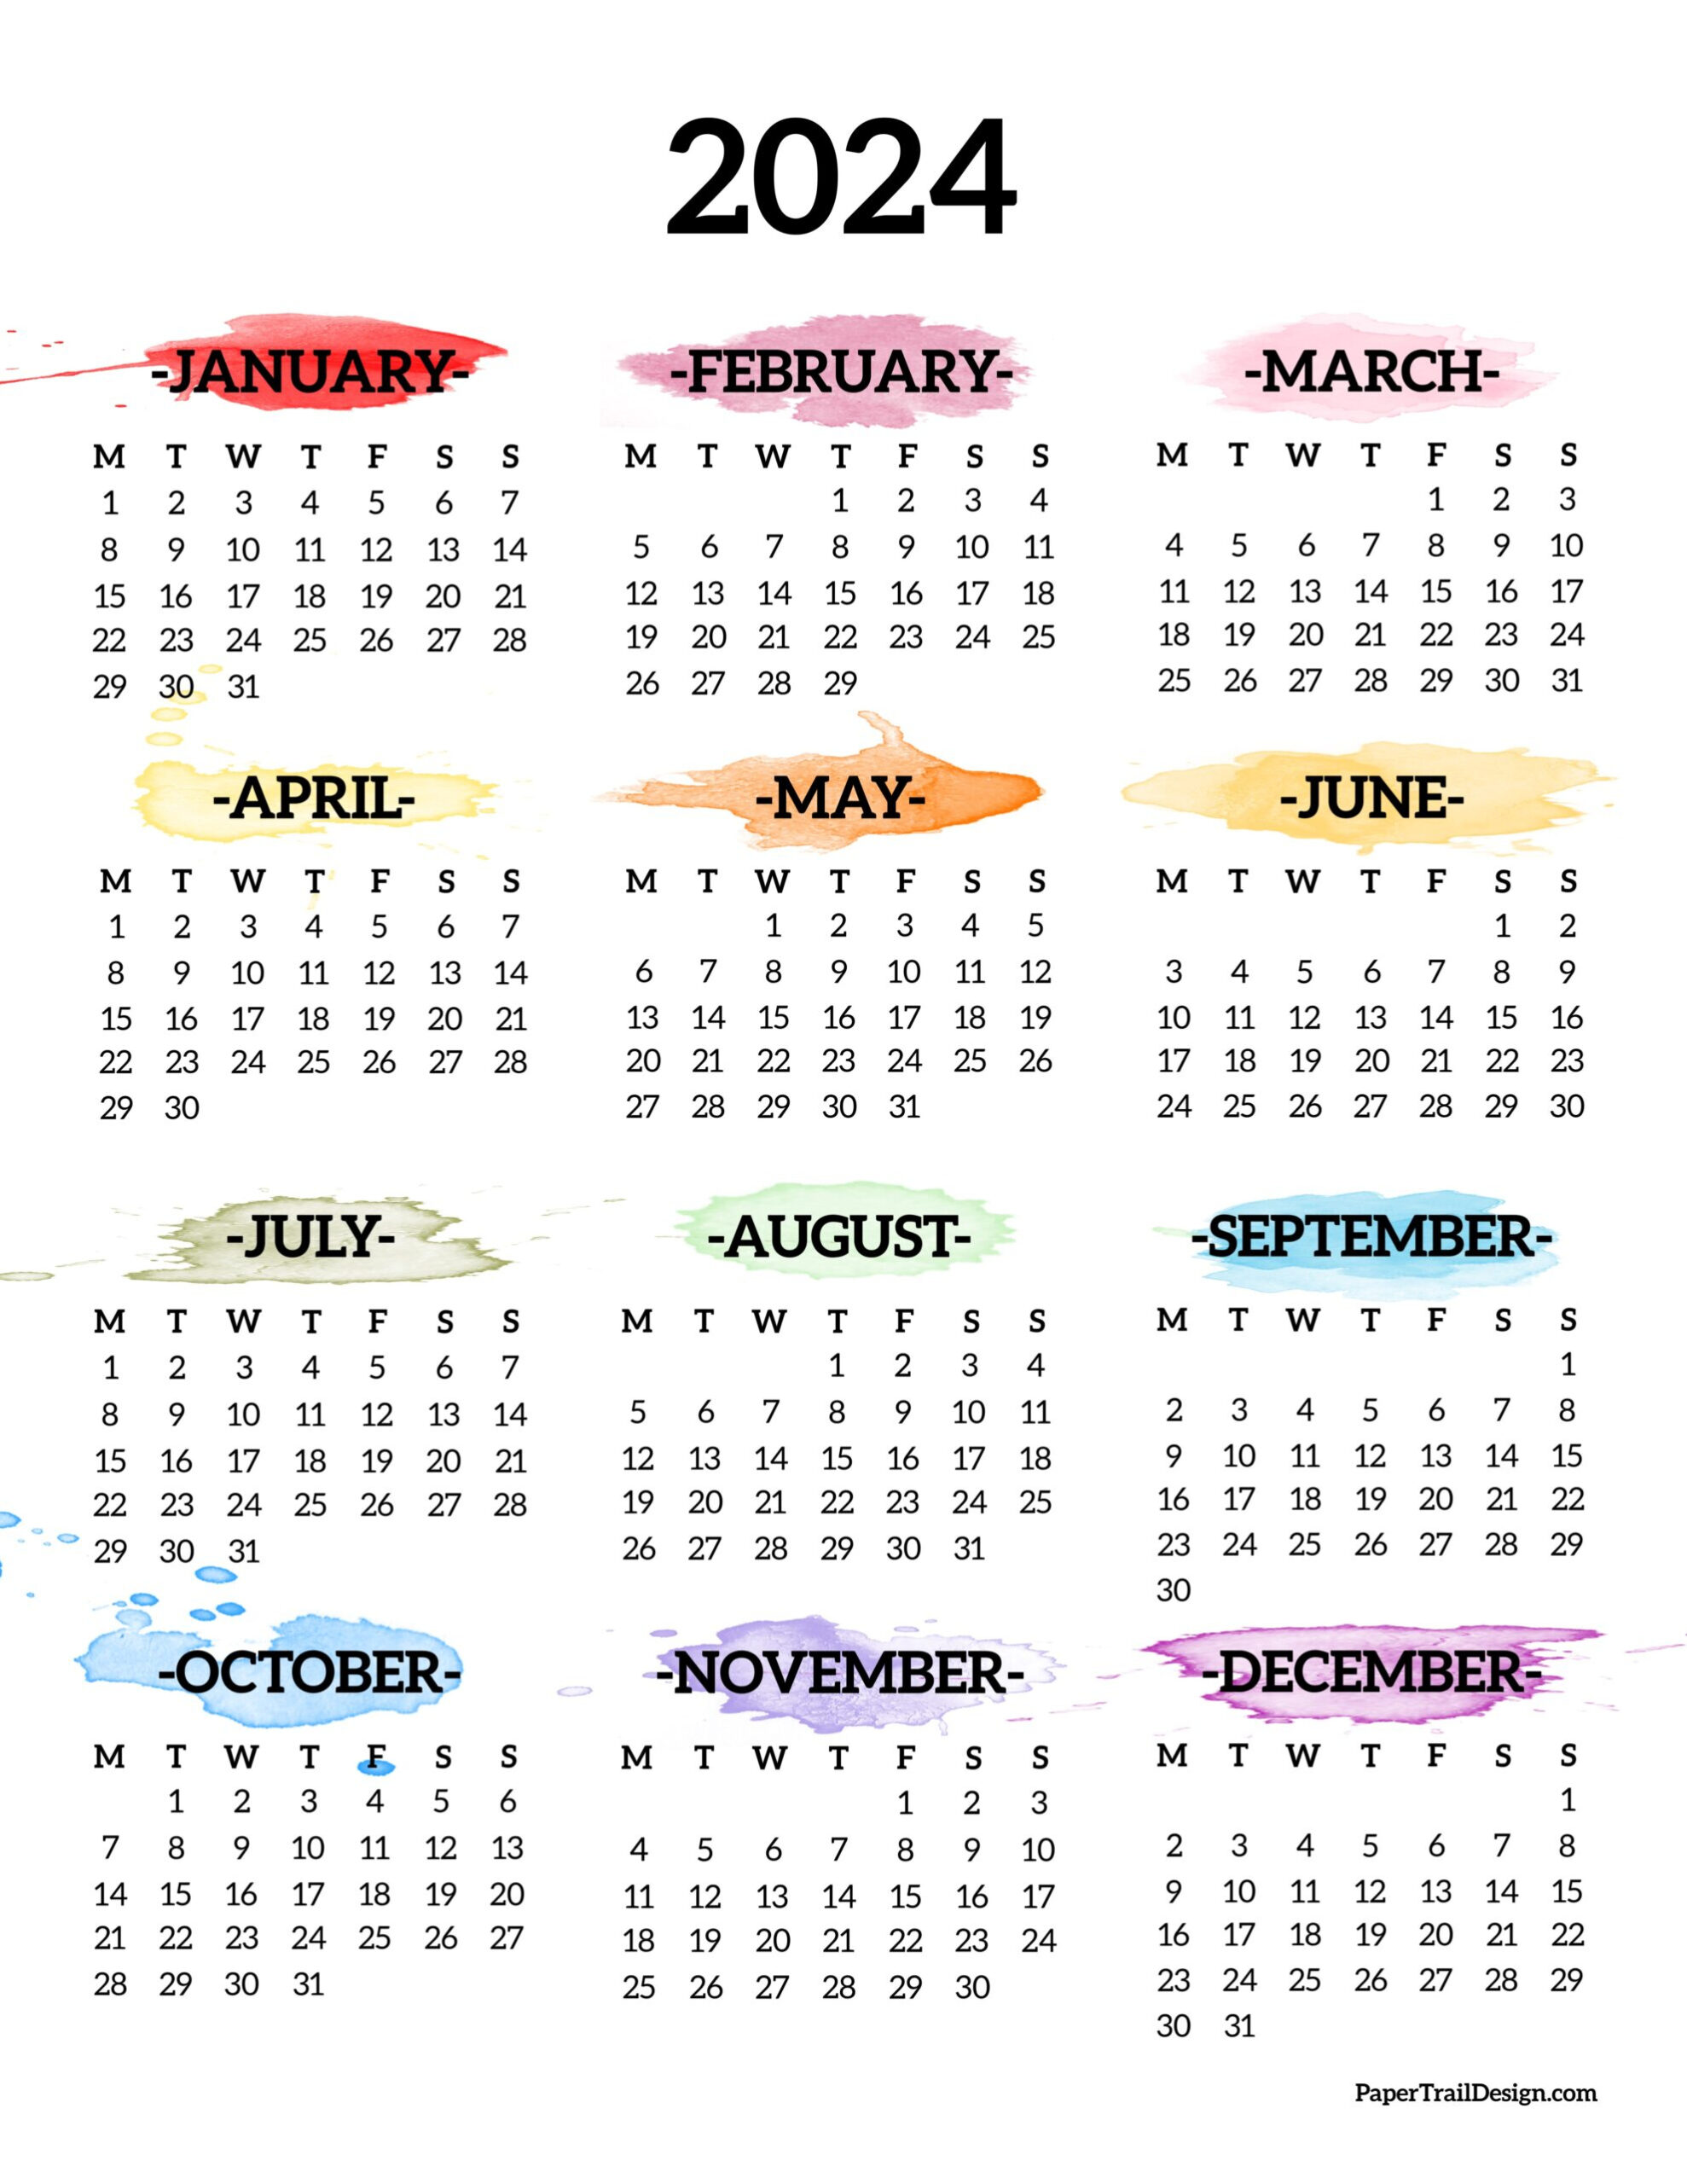 2024 Monday Start Calendar - One Page - Paper Trail Design | 2024 Printable Calendar One Page Monday Start